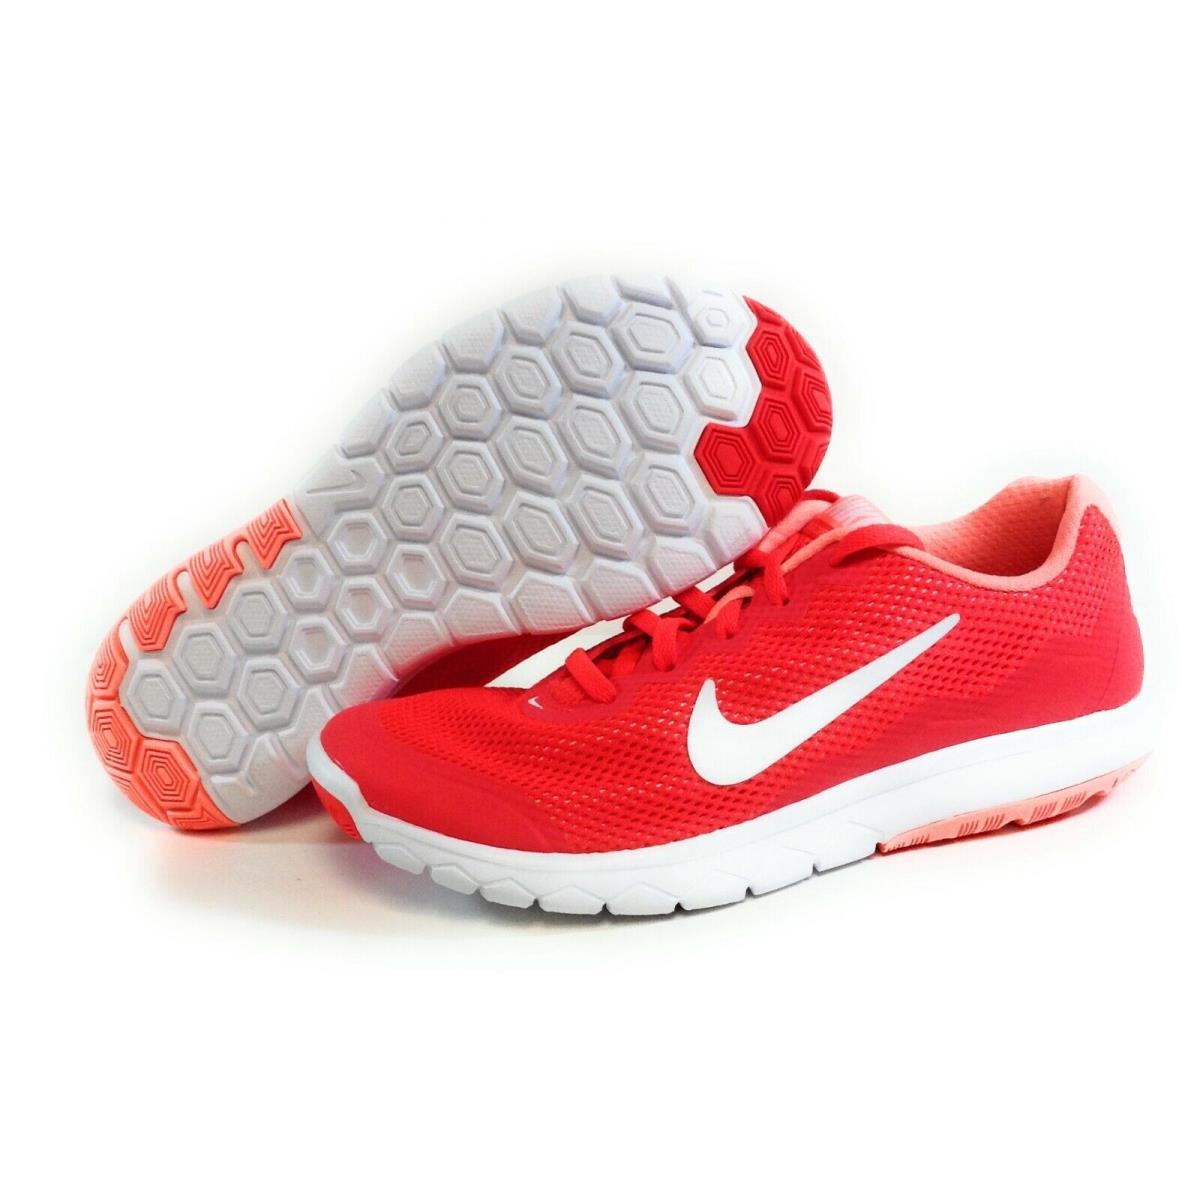 Womens Nike Flex Experience RN 4 749178 602 Coral Red 2015 DS Sneakers Shoes